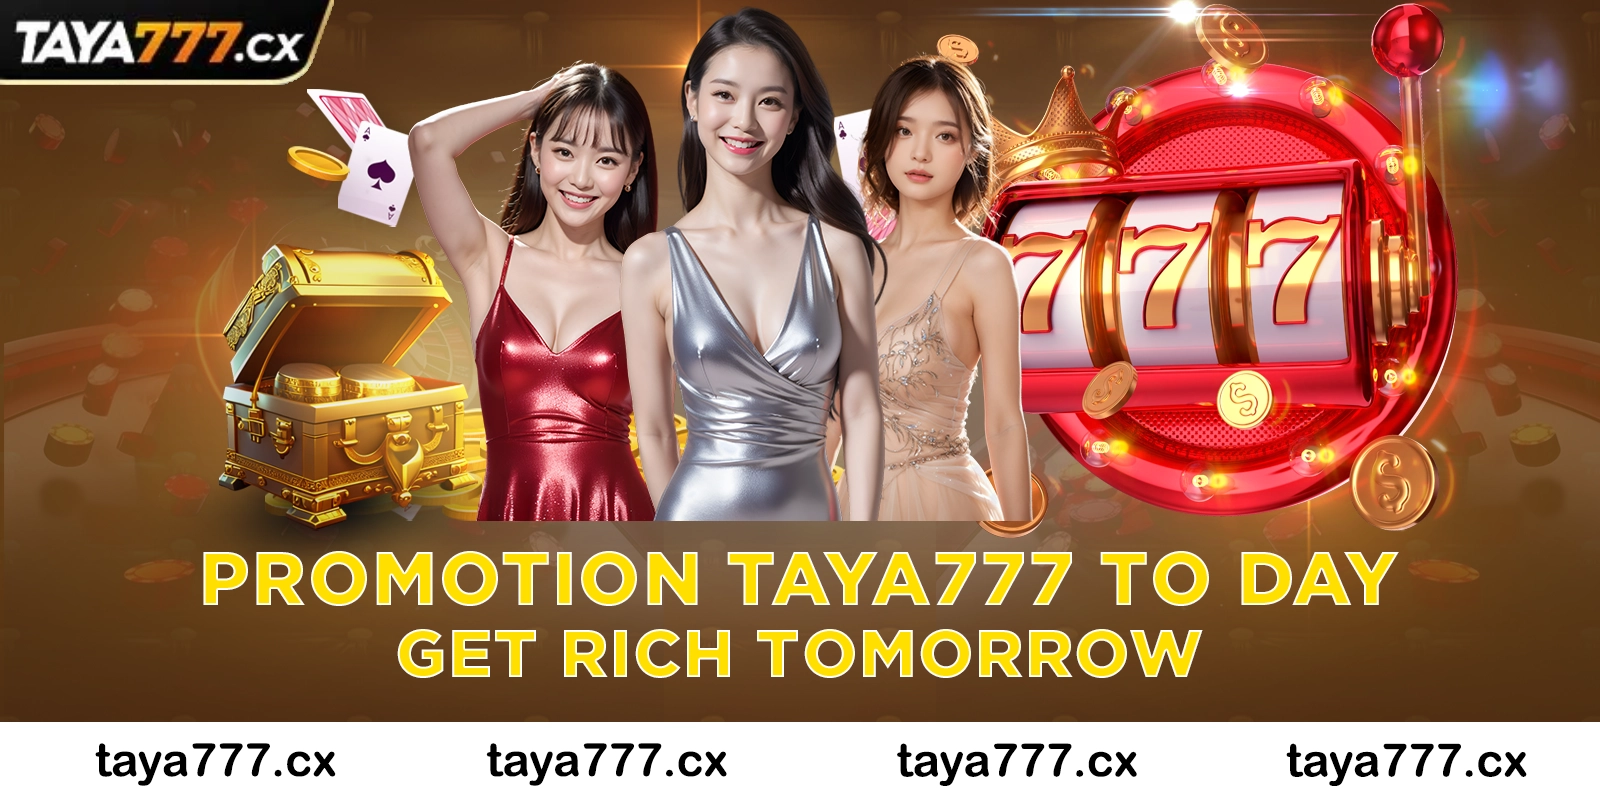 Promotion taya777 today, get rich tomorrow